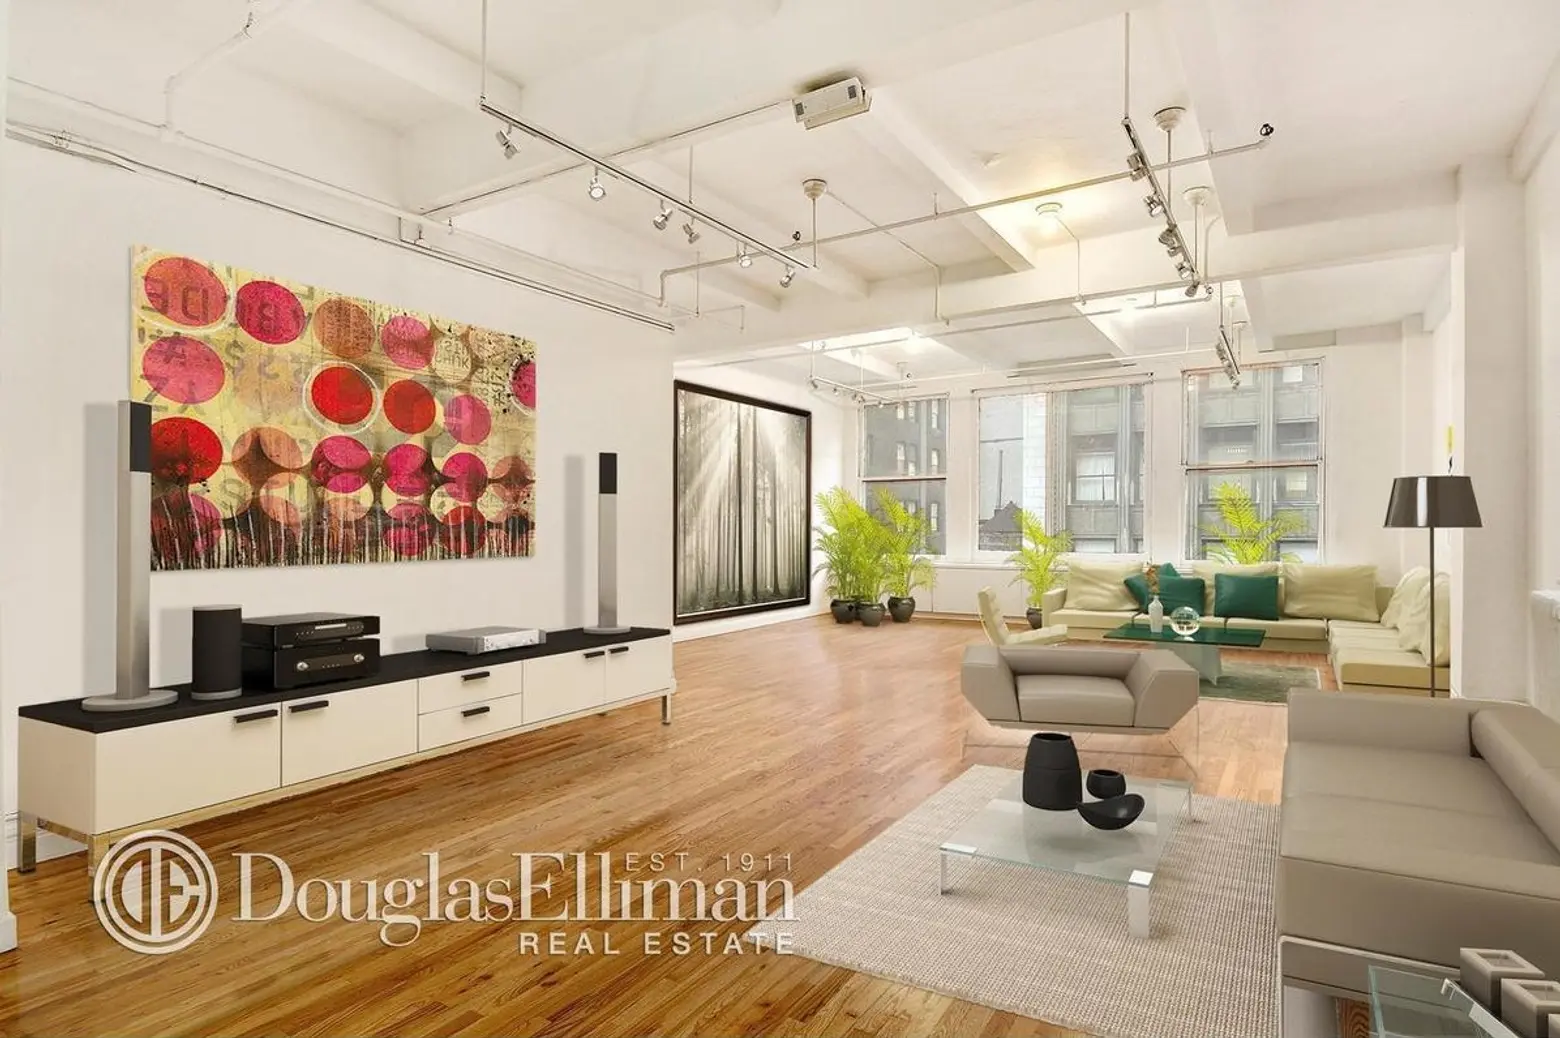 Venus and Serena Williams Sell Midtown West Apartment for $2M